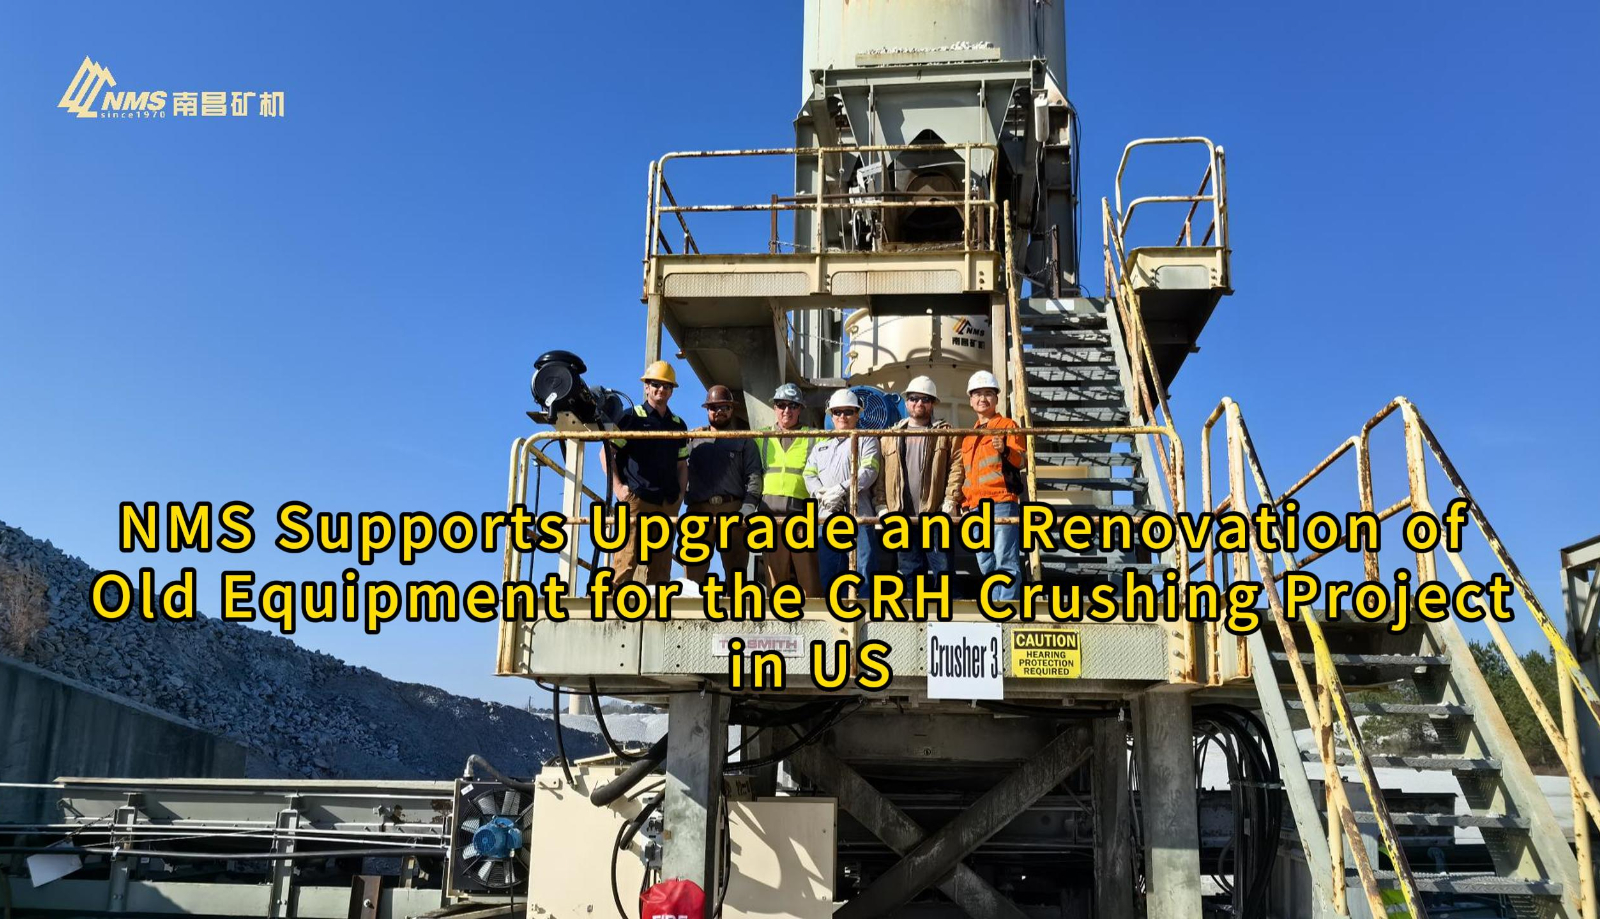 NMS Supports Upgrade and Renovation of Old Equipment for the CRH Crushing Project in US